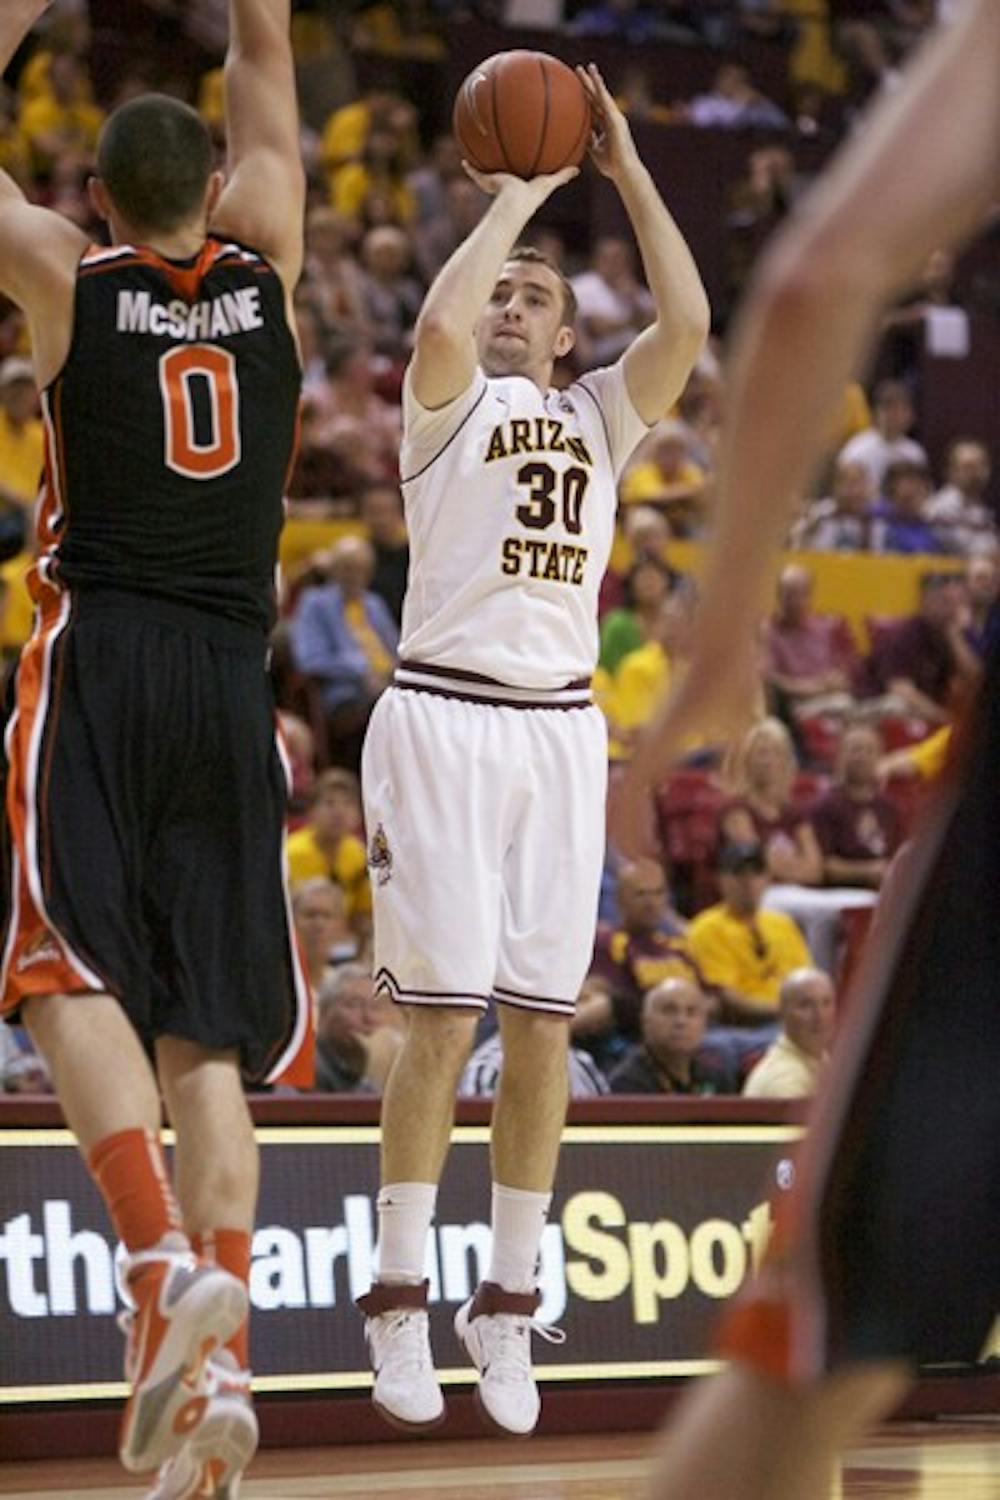 Favorable momentum: ASU senior guard Rihards Kuksiks shoots over Oregon State redshirt junior forward Kevin McShane during the Sun Devils’ 80-66 victory over the Beavers on Saturday. ASU opens the first round against Oregon on Wednesday, the only Pac-10 team it swept this season. (Photo by Scott Stuk)